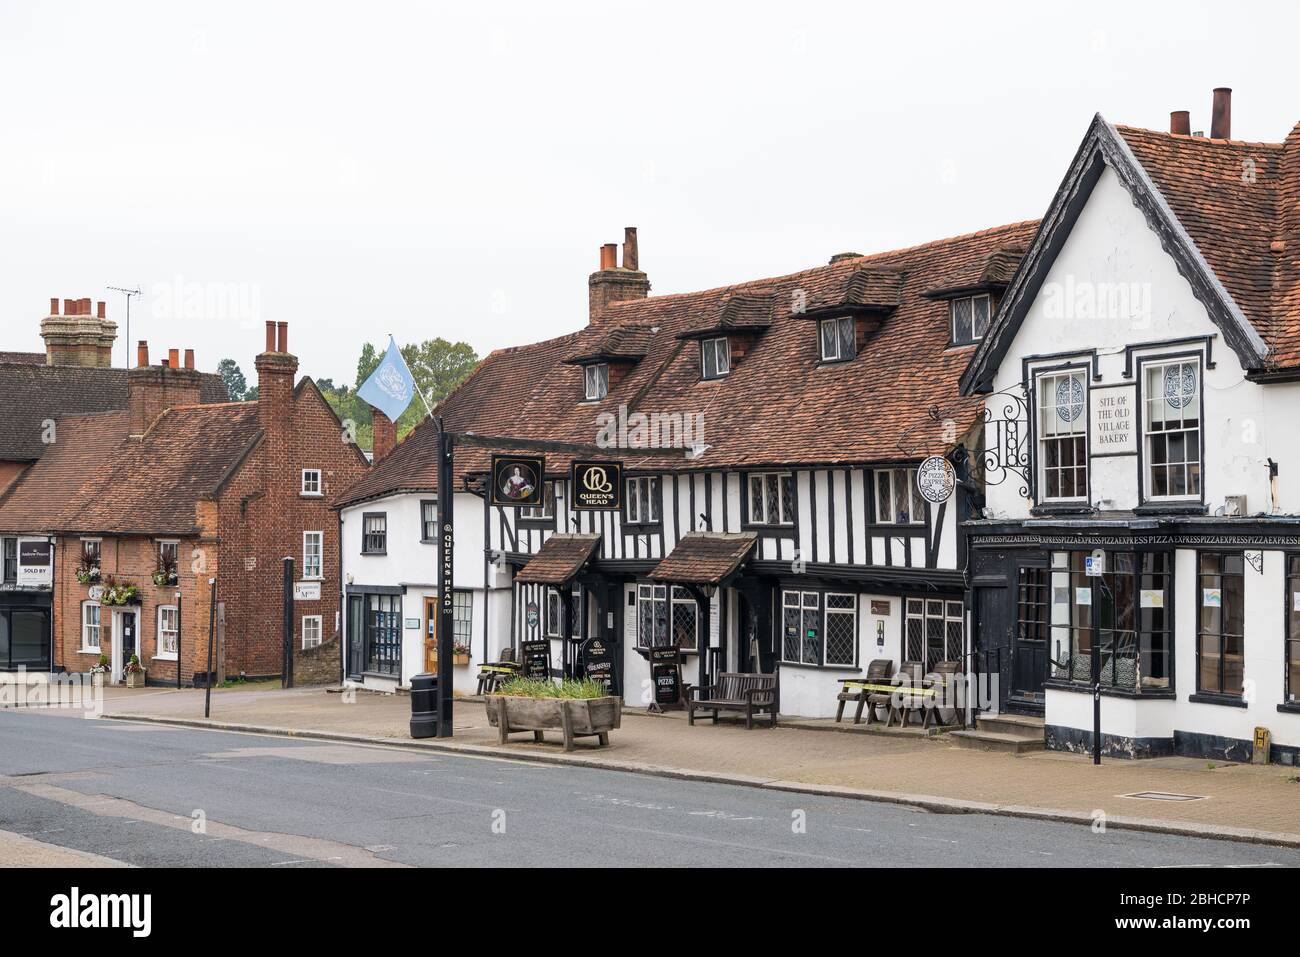 The Queens Head public house, a grade ll listed 16th century Wealden house in Pinner High Street conservation area, Middlesex, England, UK Stock Photo